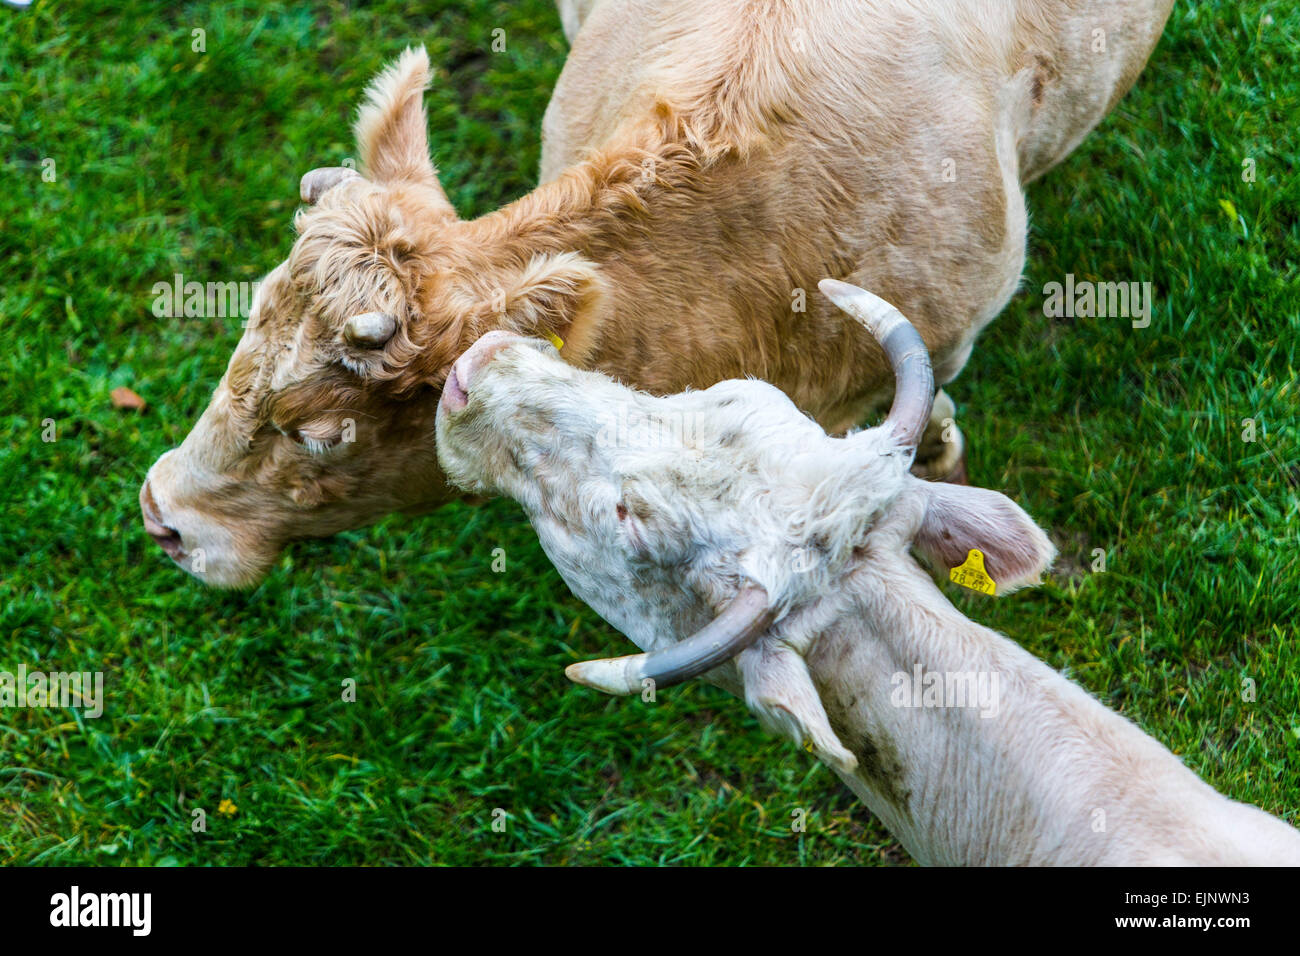 Cows in a pasture, cuddle, mother cow with calf Stock Photo